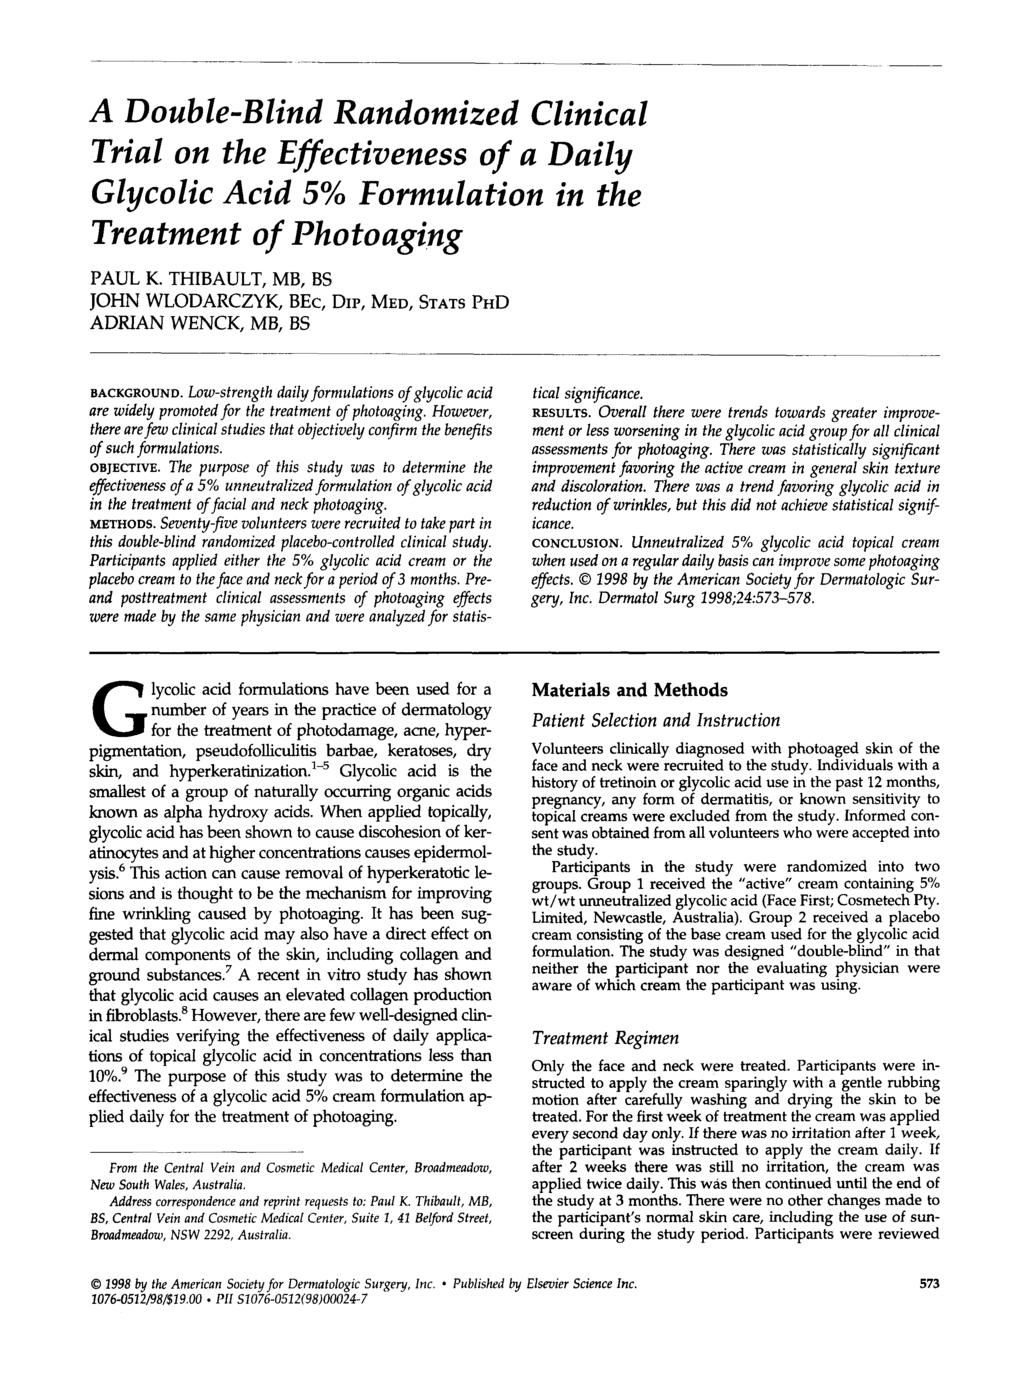 A DoubleBlind Randomized Clinical Trial on the Eflectiveness of a Daily Glycolic Acid 5% Formulation in the Treatment of Photoaging PAUL K.